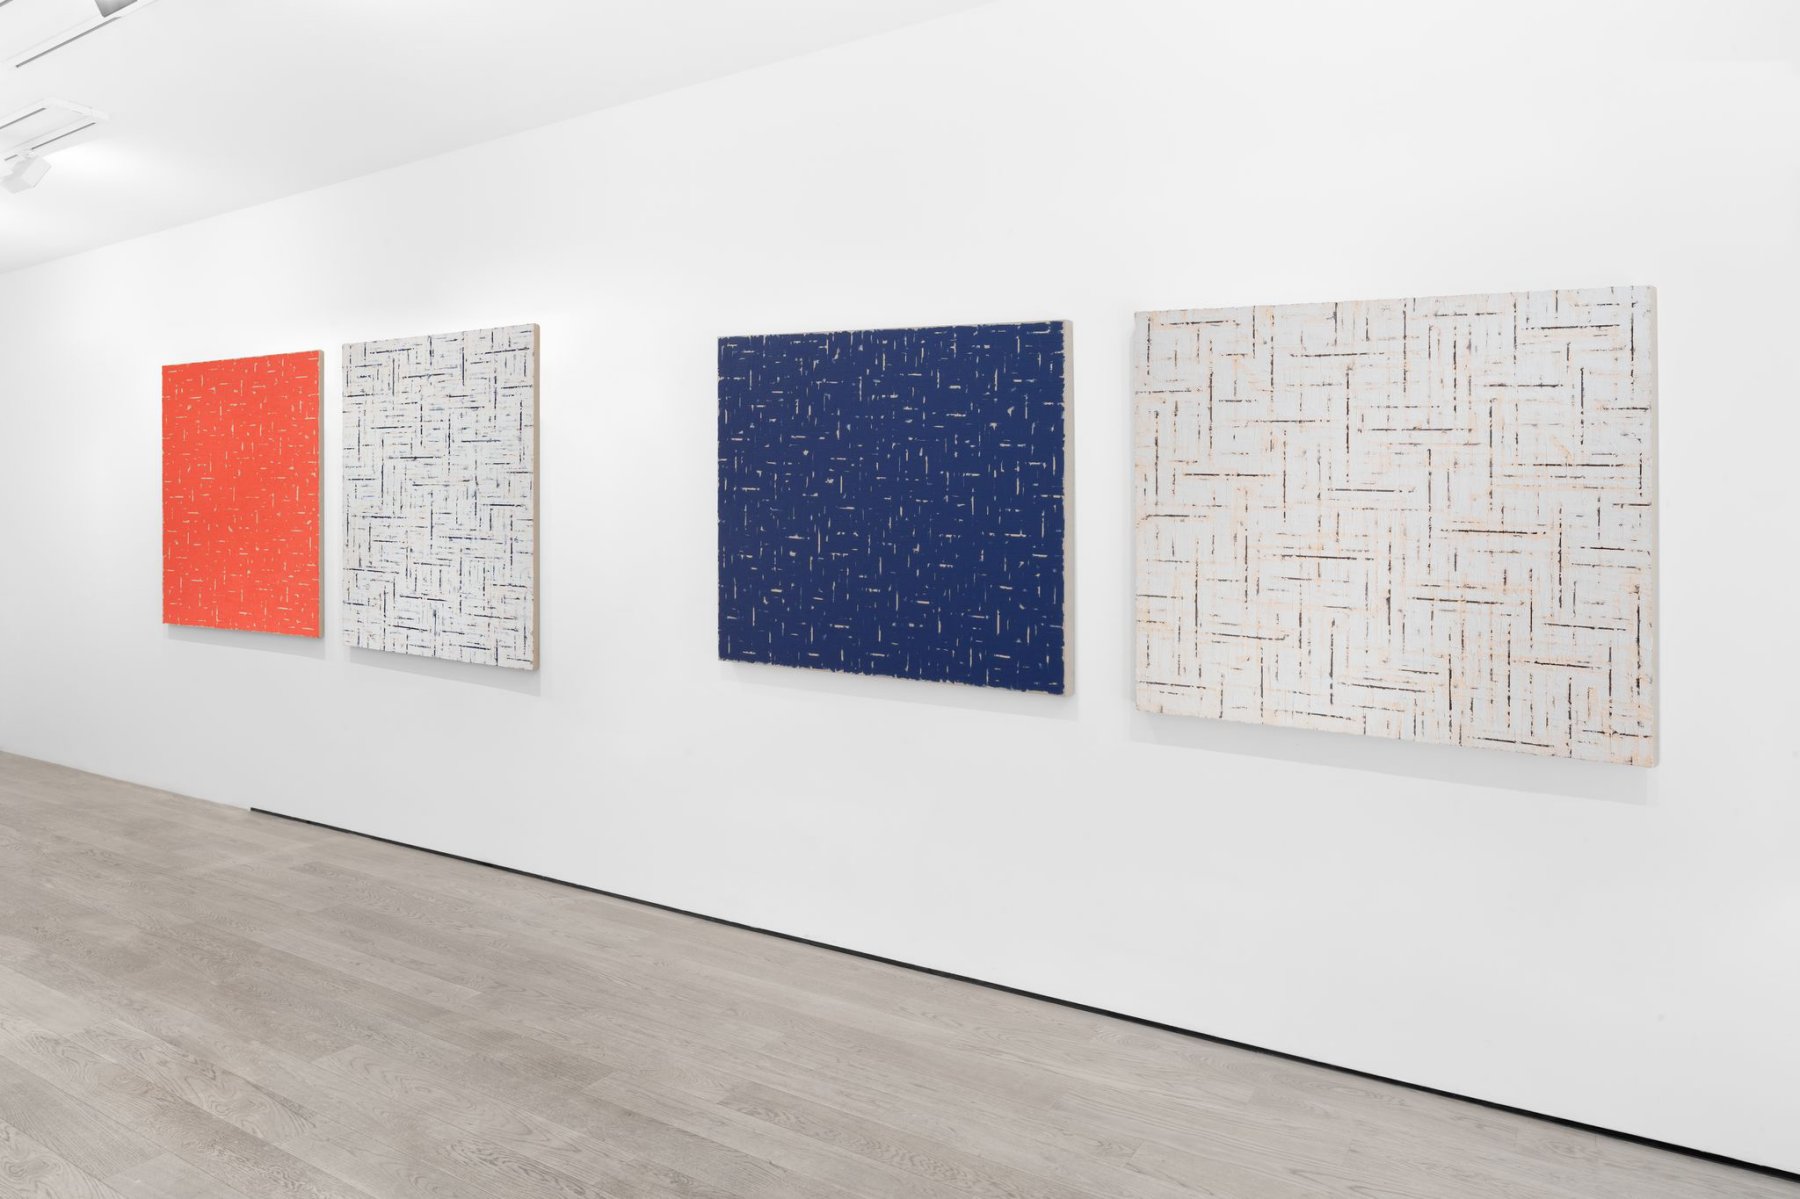 Installation image for Choi Myoung Young: Conditional Planes, at Almine Rech